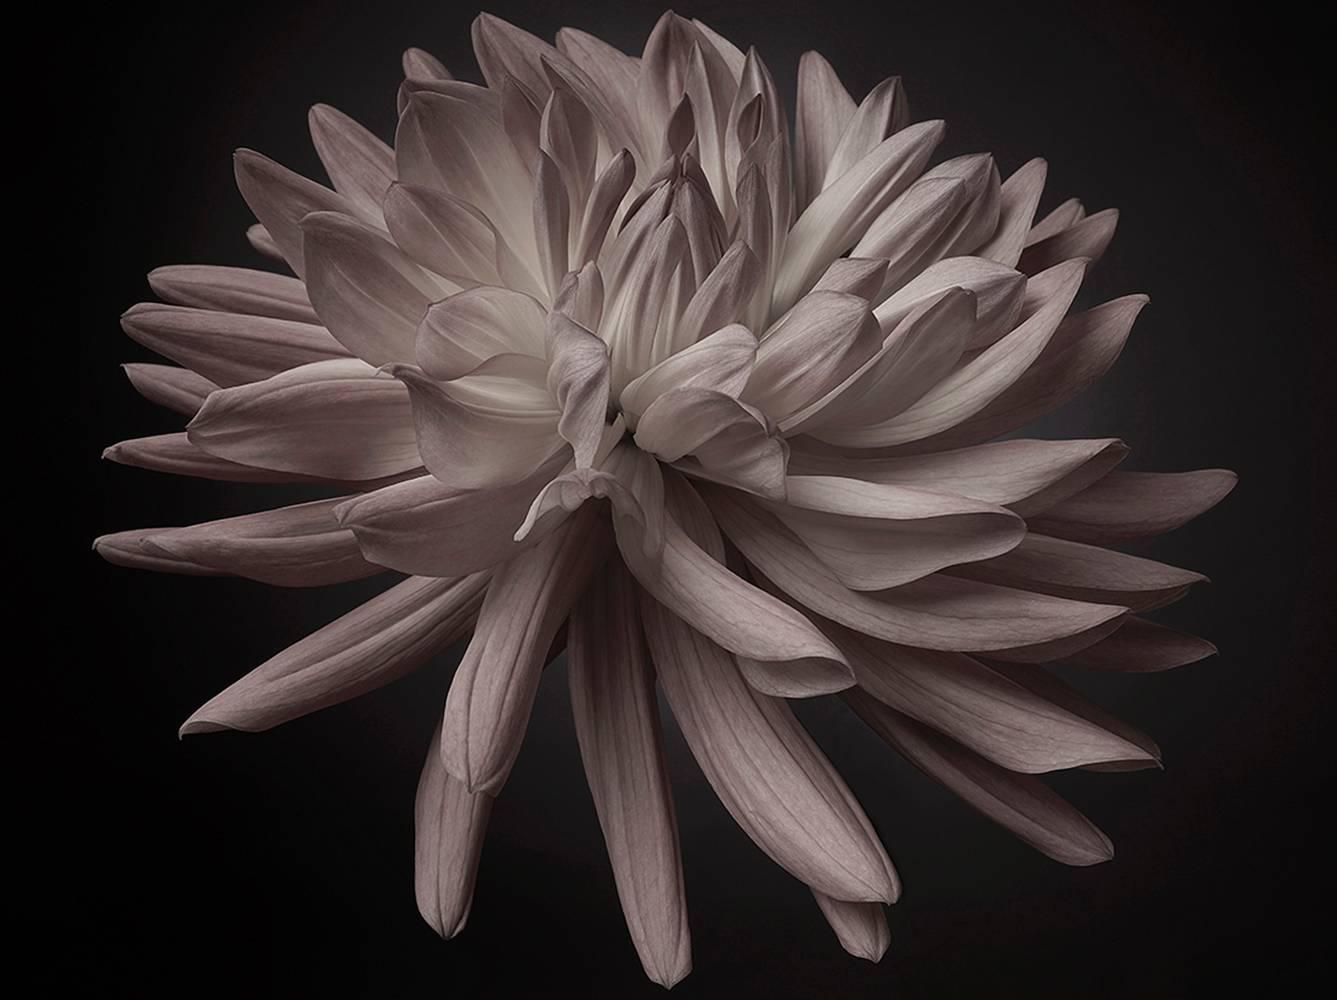 Photograph - Flower series (16x22) - Black Figurative Photograph by MAE Curates